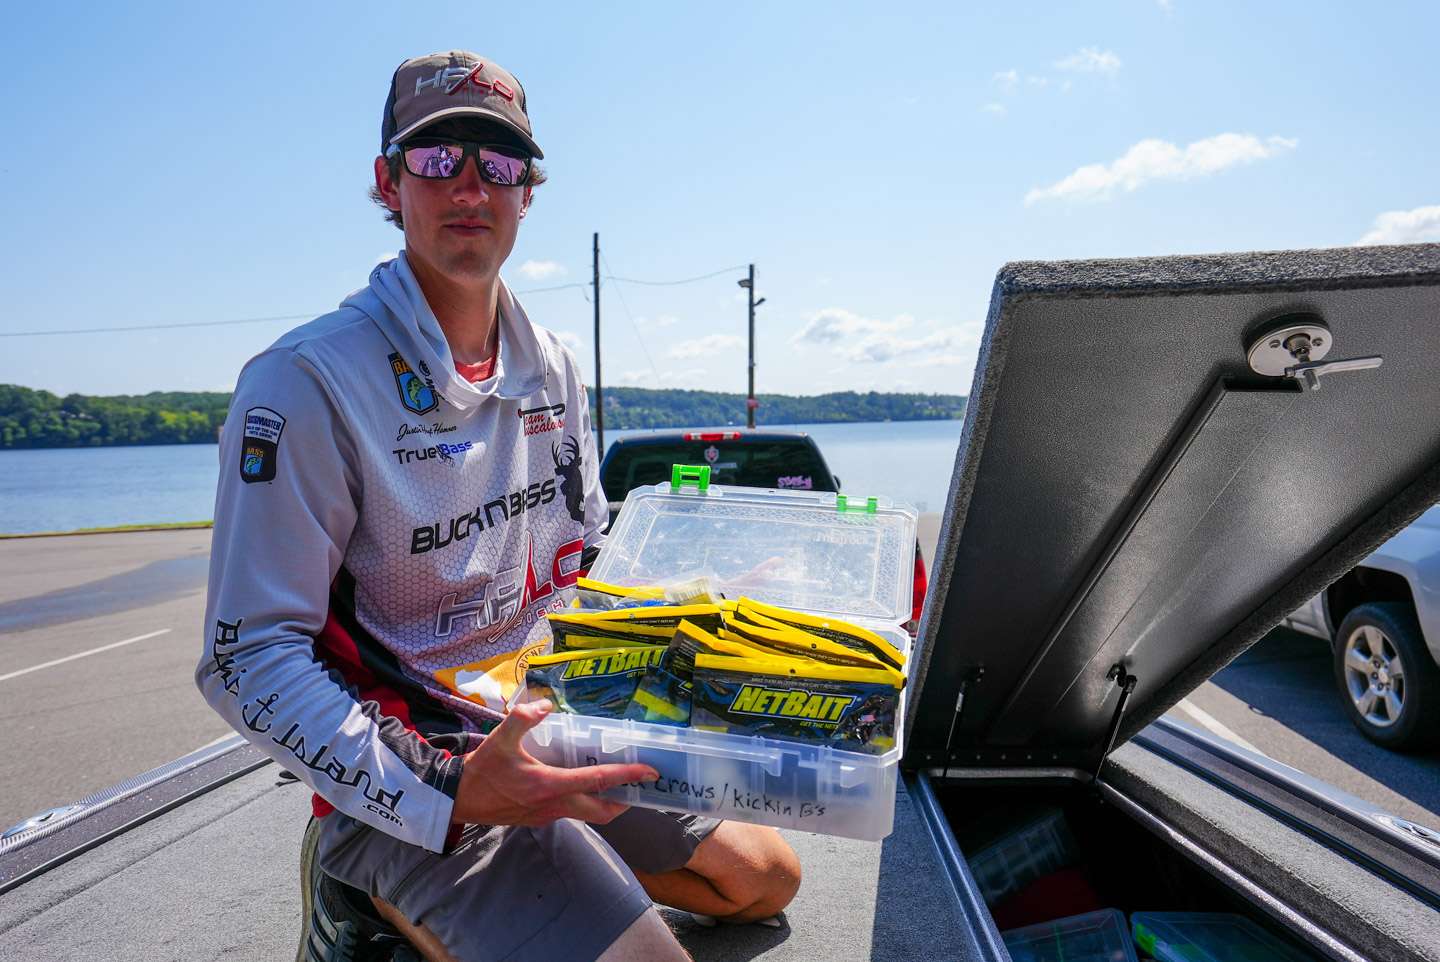 Hamner pulls out one of his favorite boxes in the boat â a box full of Netbait Kickin B's.